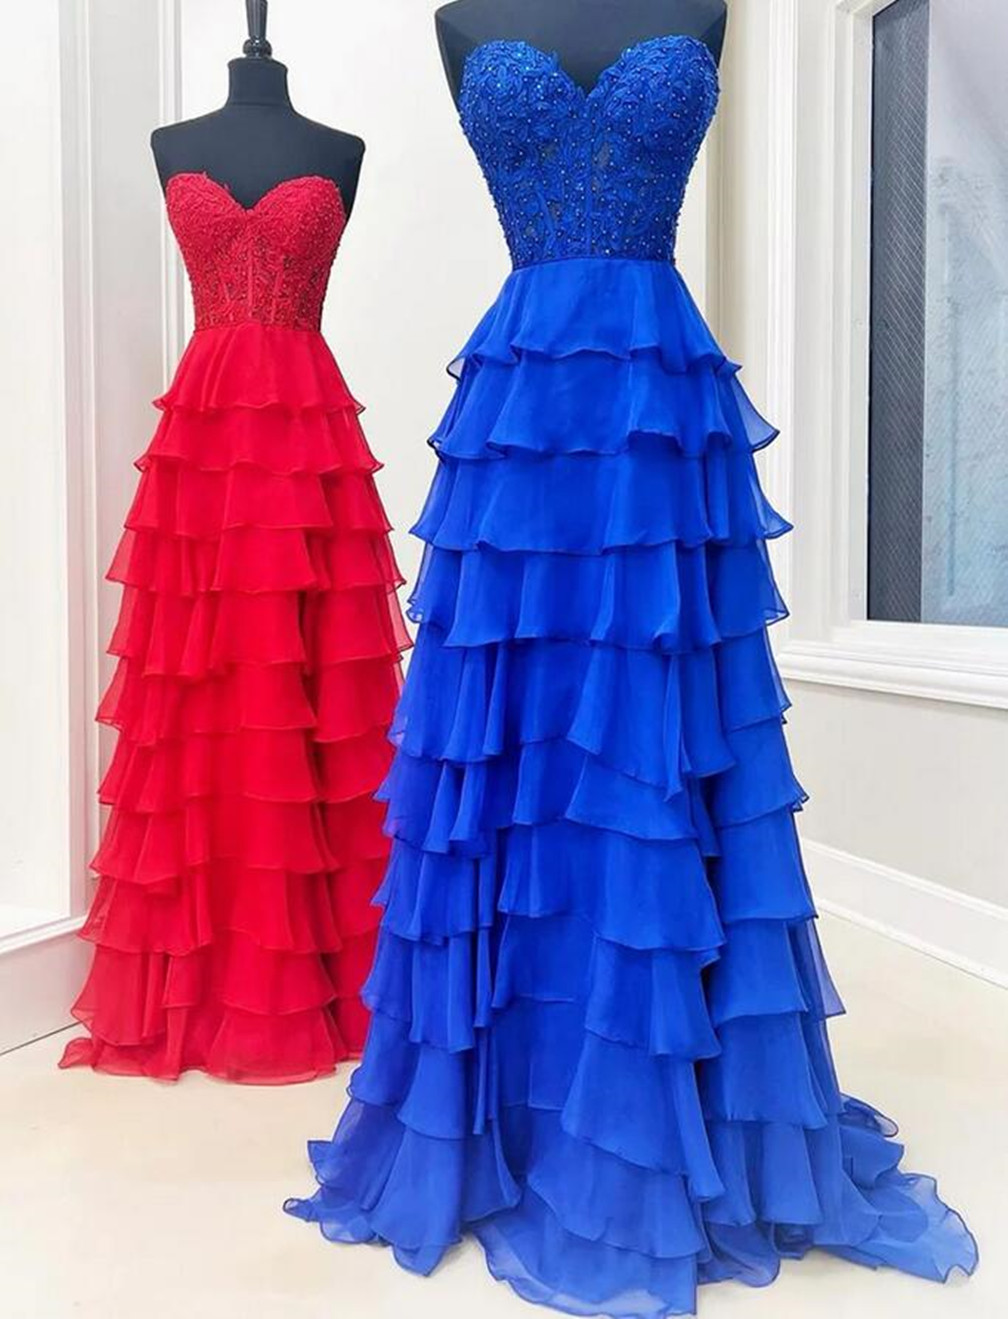 Women A-line Princess Appliques Prom Dresses Long Sweetheart Evening Gowns Strapless Formal Party Dress Yp004